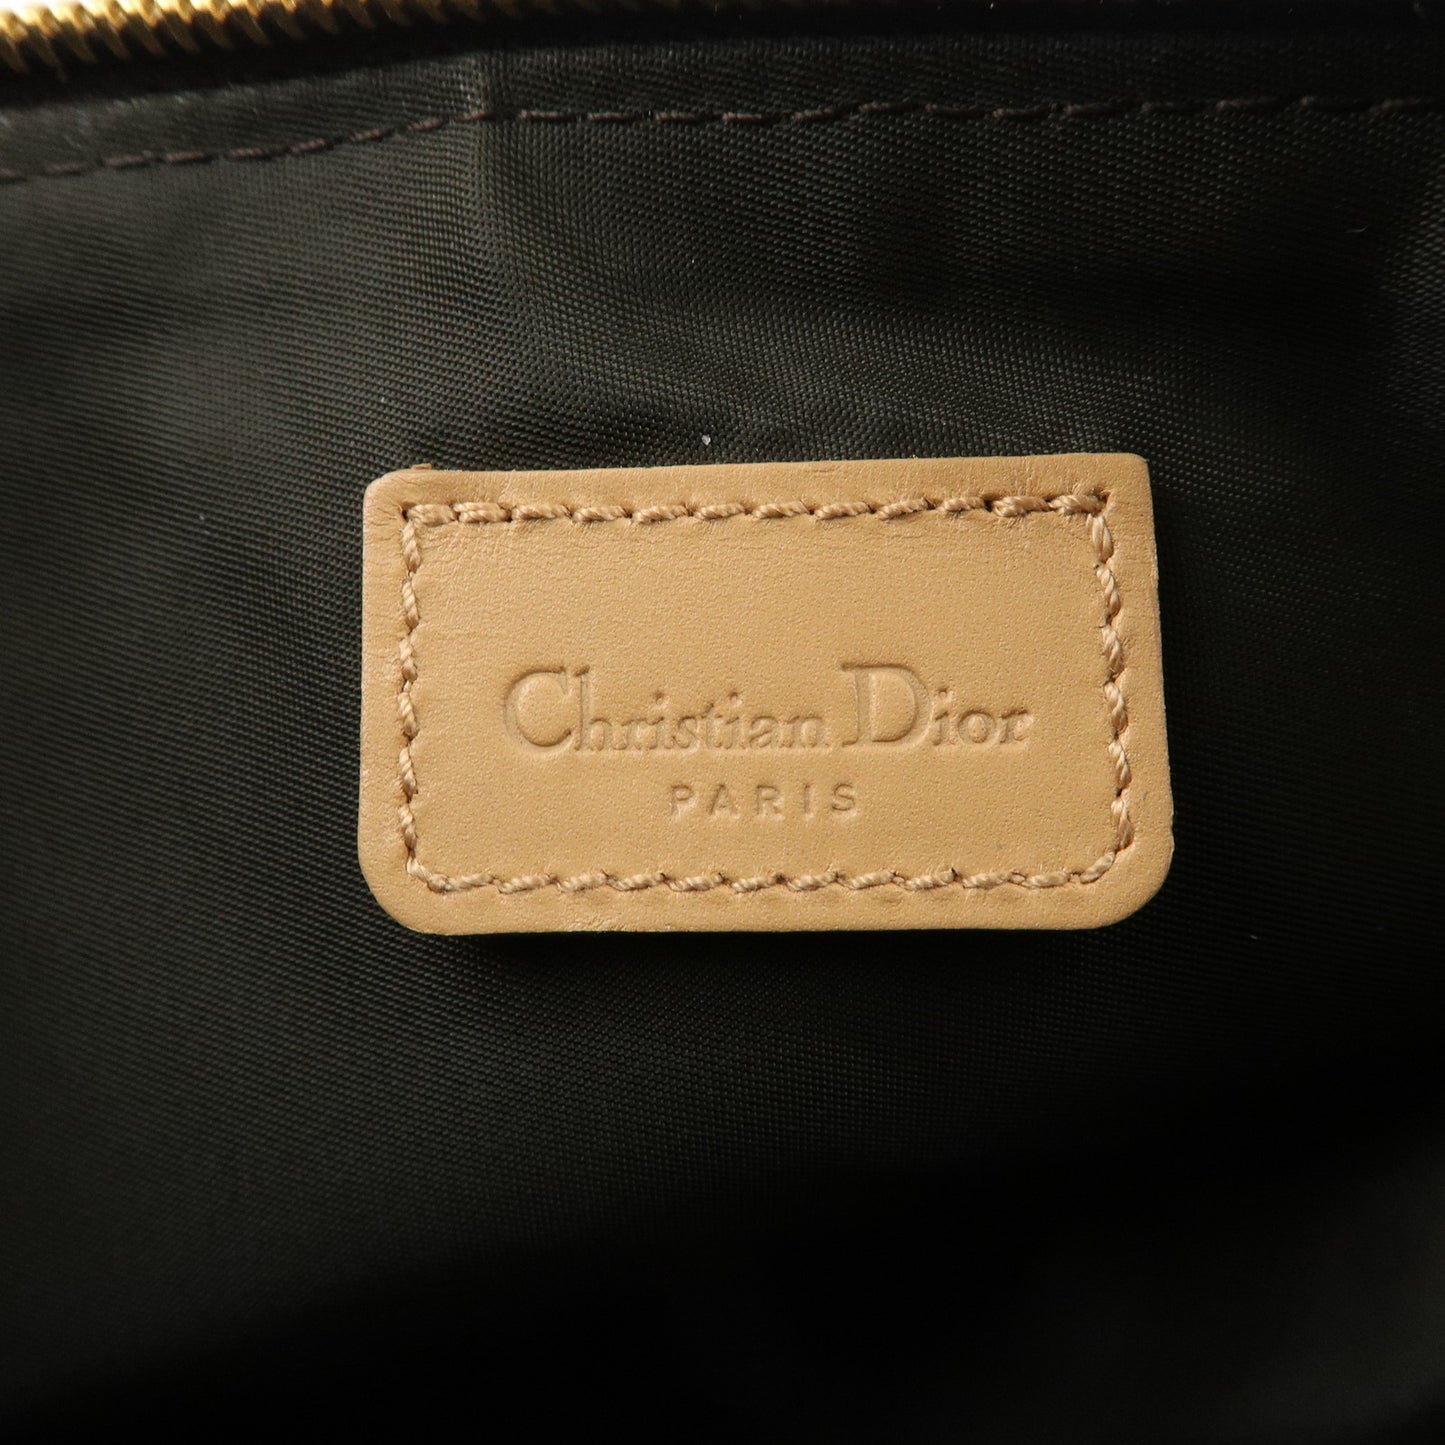 Christian Dior Saddle Bag Trotter Canvas Leather Pouch Hand Bag